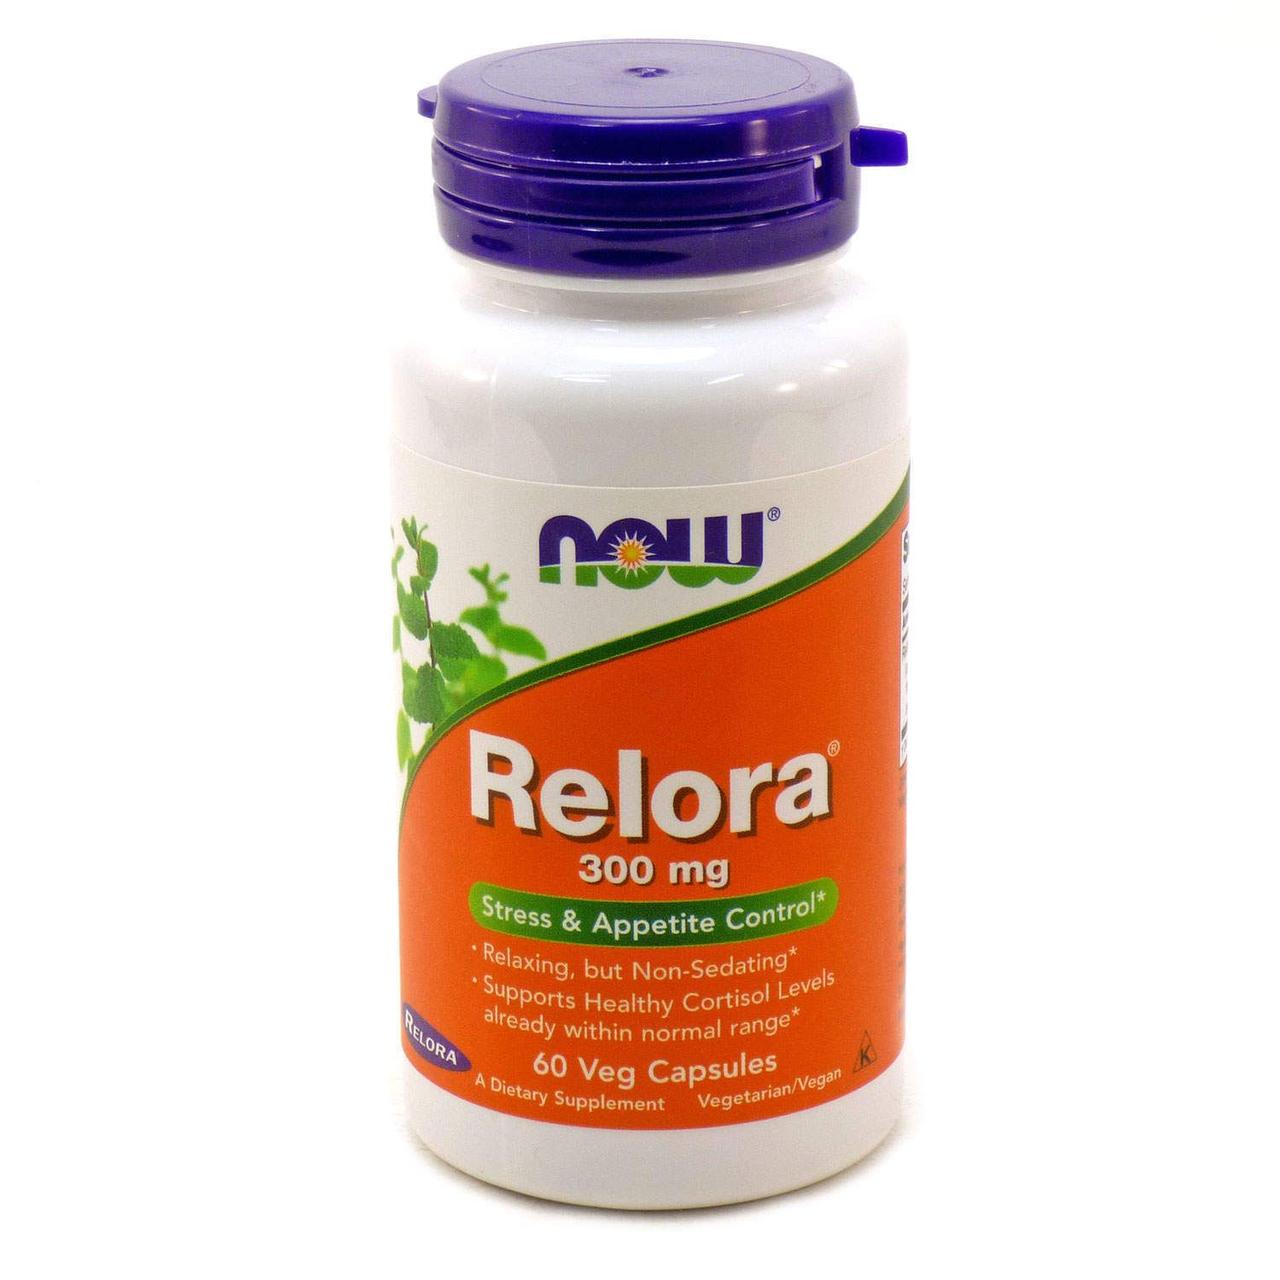 Релора NOW Foods Relora 300 mg 60 Caps,  ml, Now. Special supplements. 